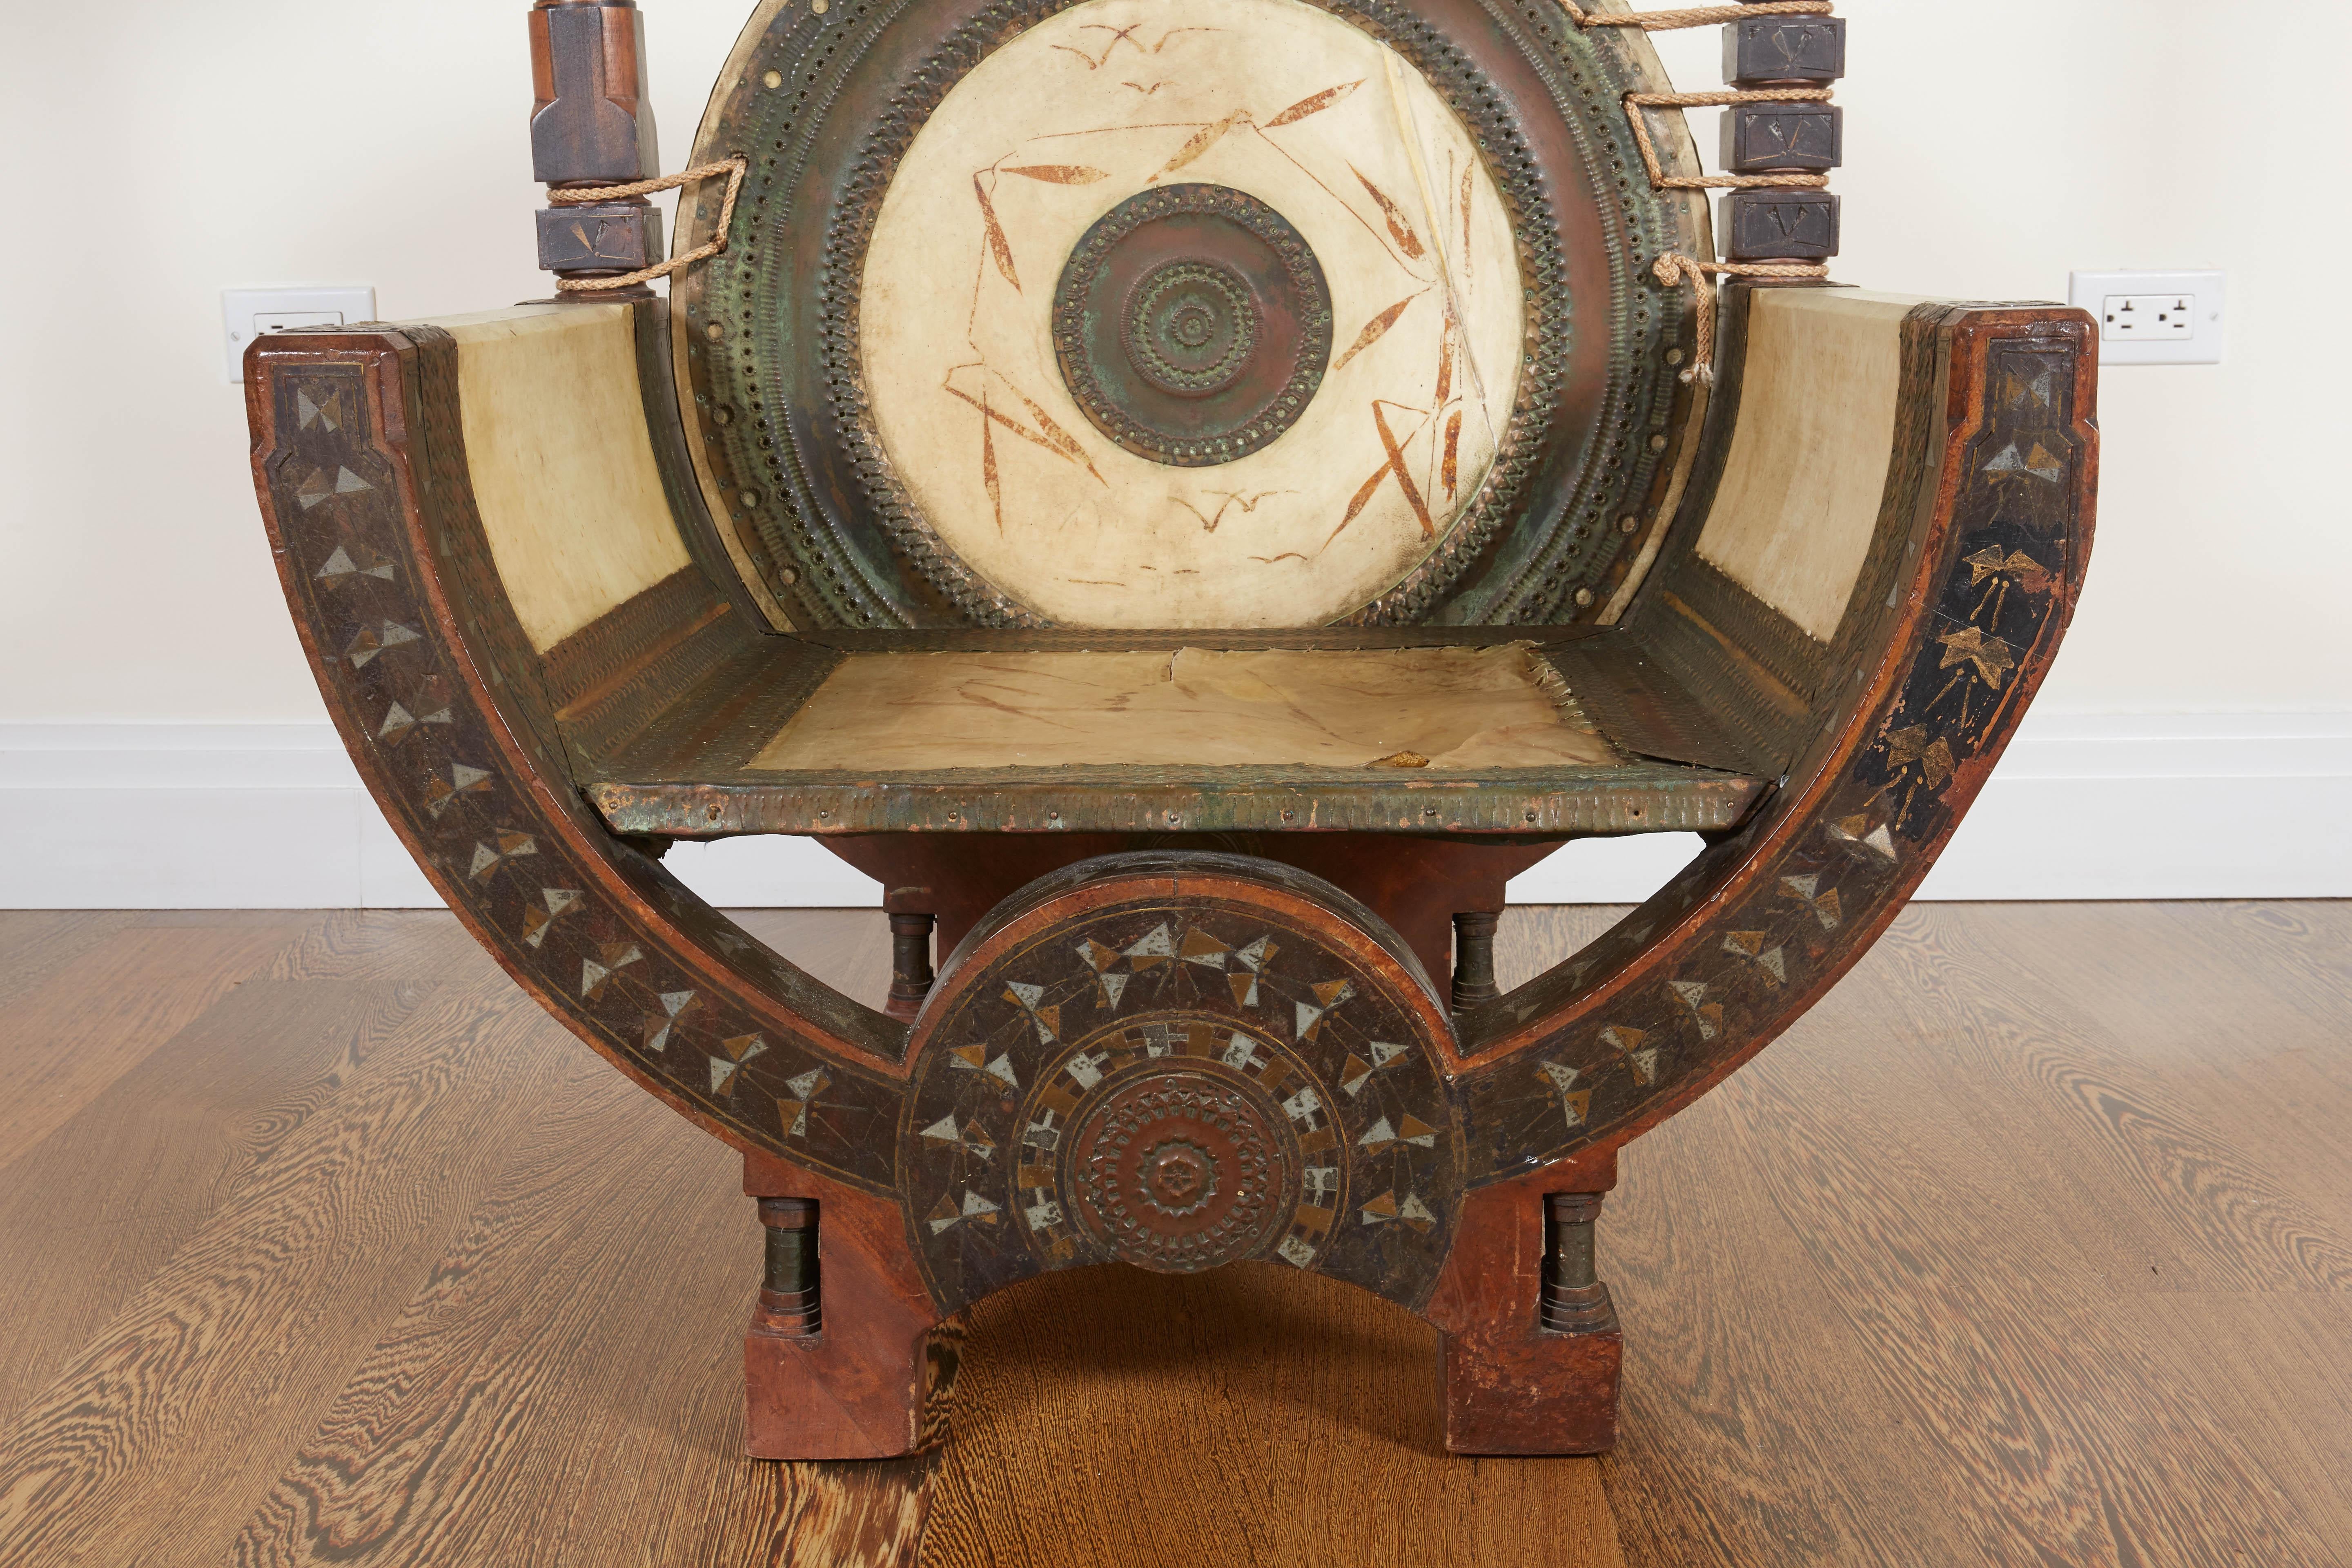 Of stylized curule form embellished in Bugatti's signature blend of Moorish and Japanese motives; with vellum hand-painted circular back and seat, and geometrical inlay and applied repoussé and pierced copper overall.